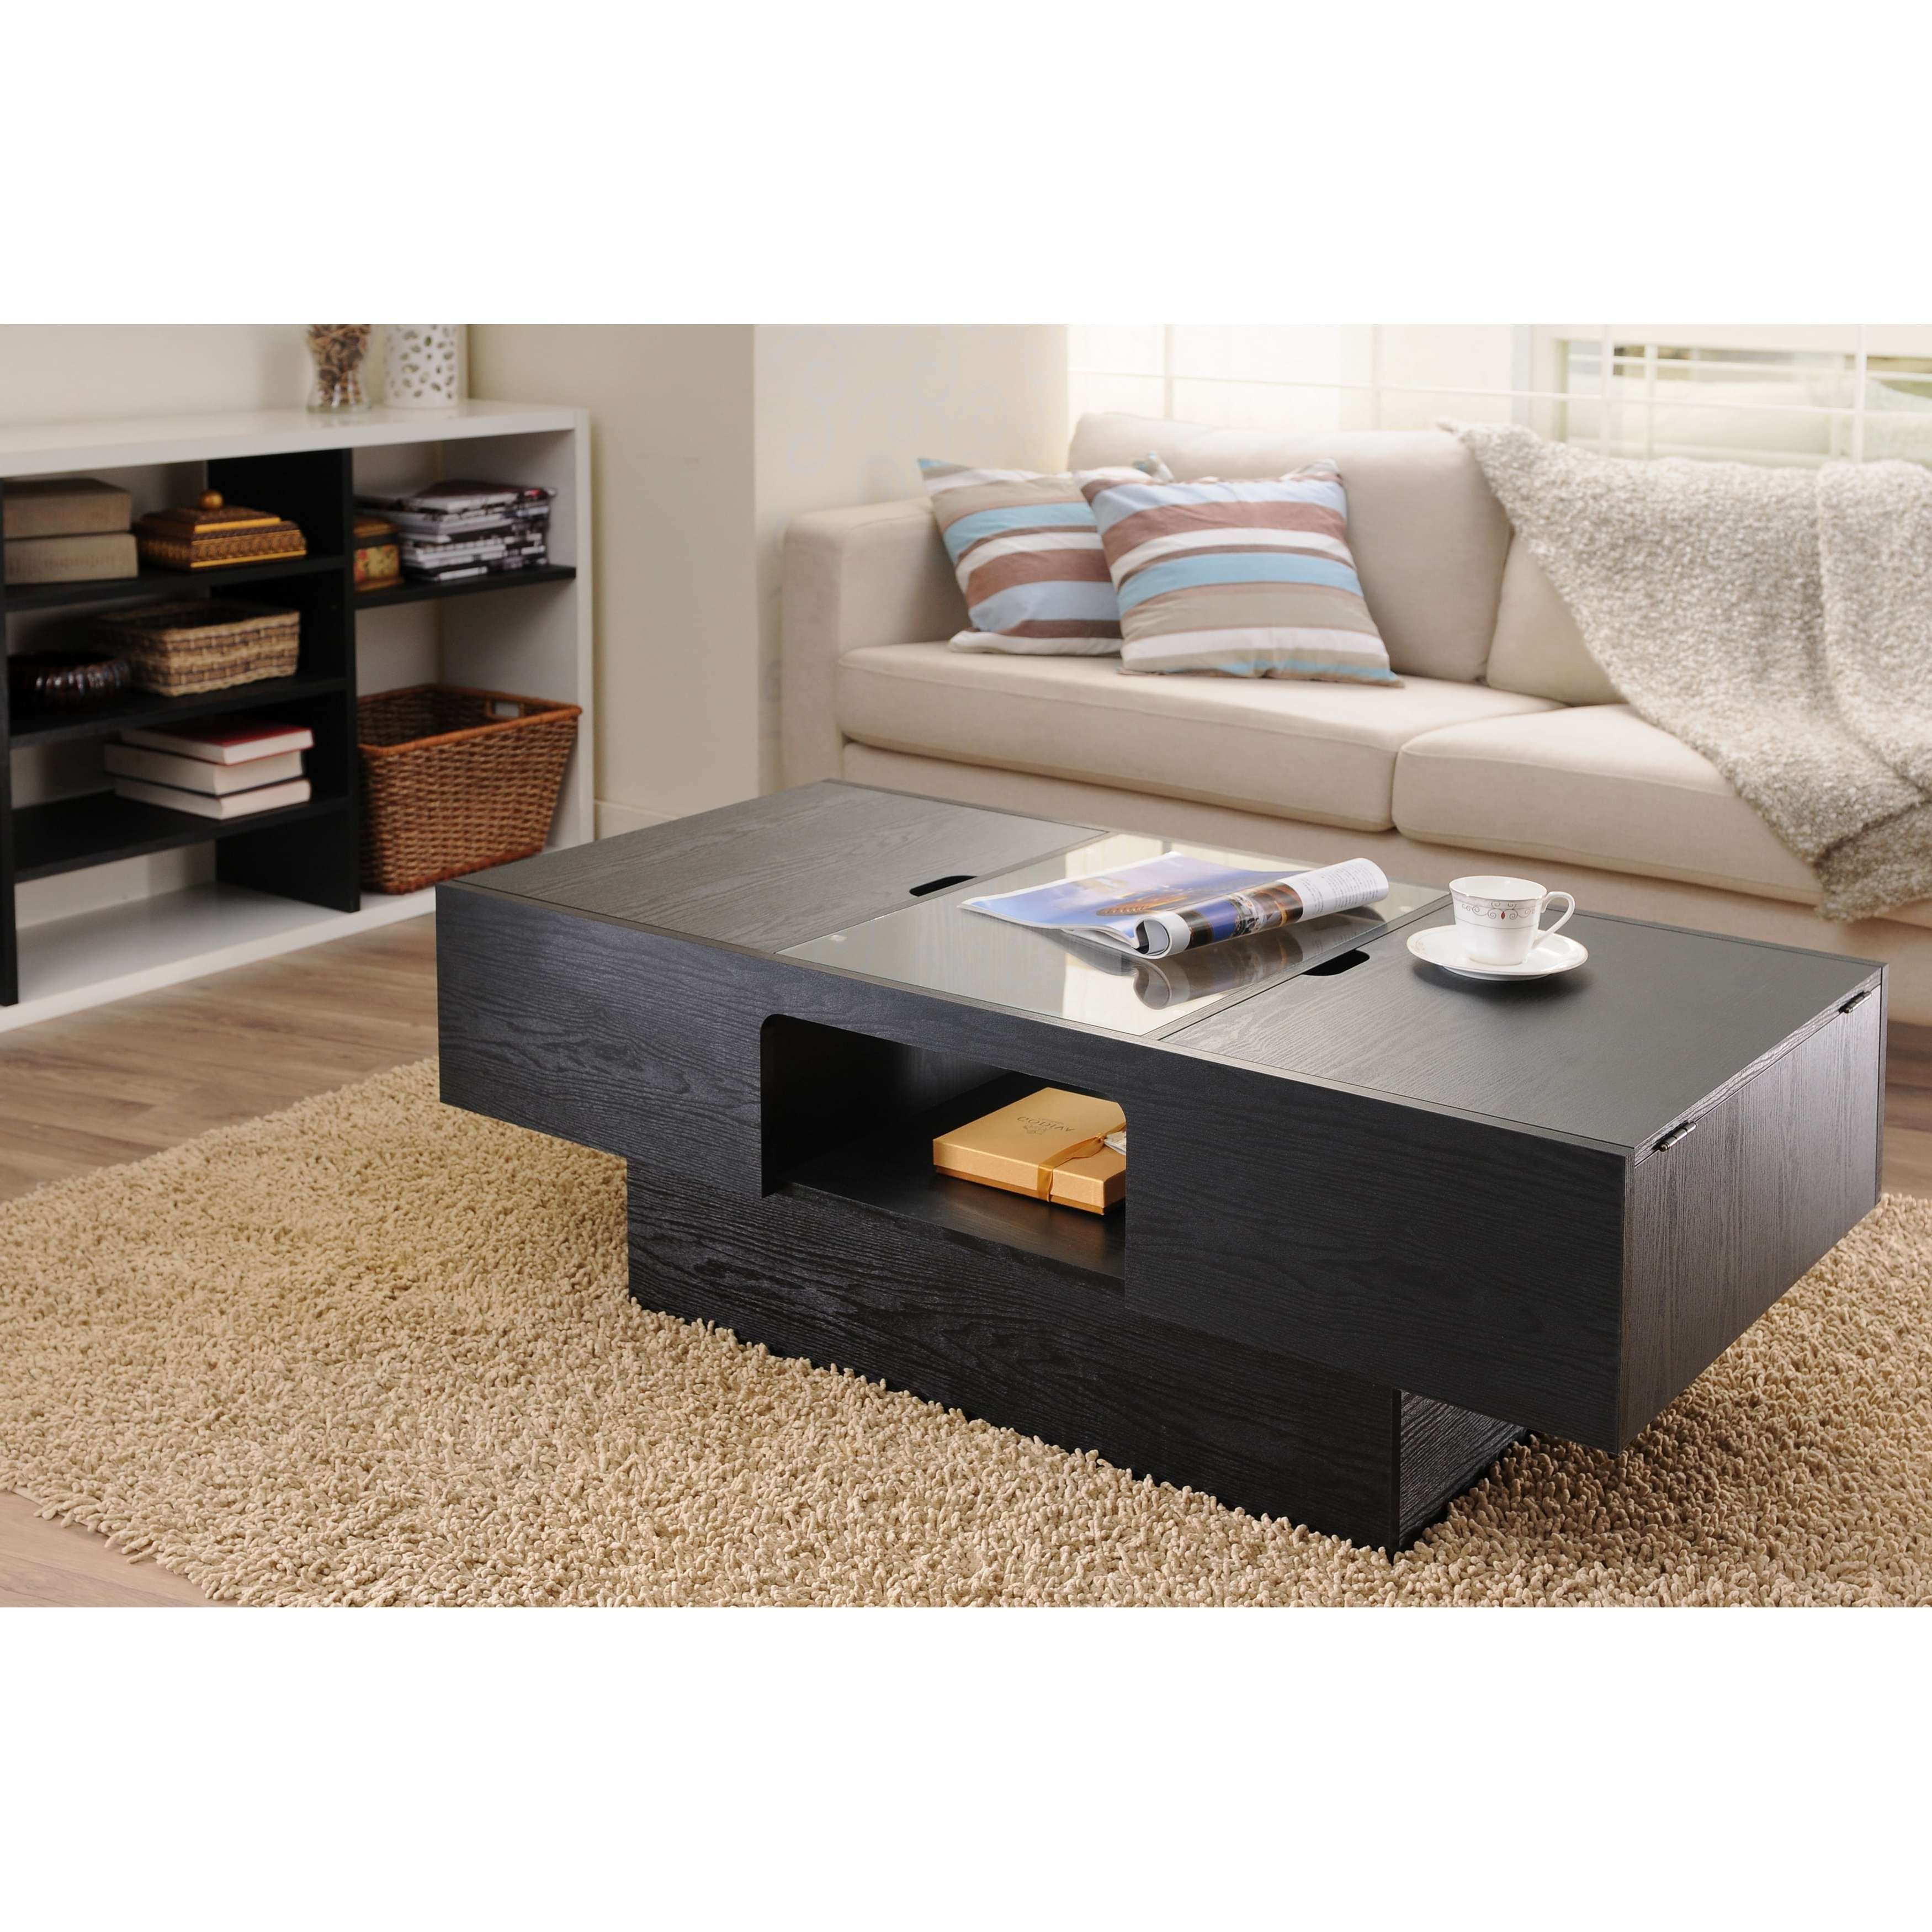 Furniture Of America Stevie Black Finish Hidden Storage Coffee Inside Most Up To Date Storage Coffee Tables (View 13 of 20)